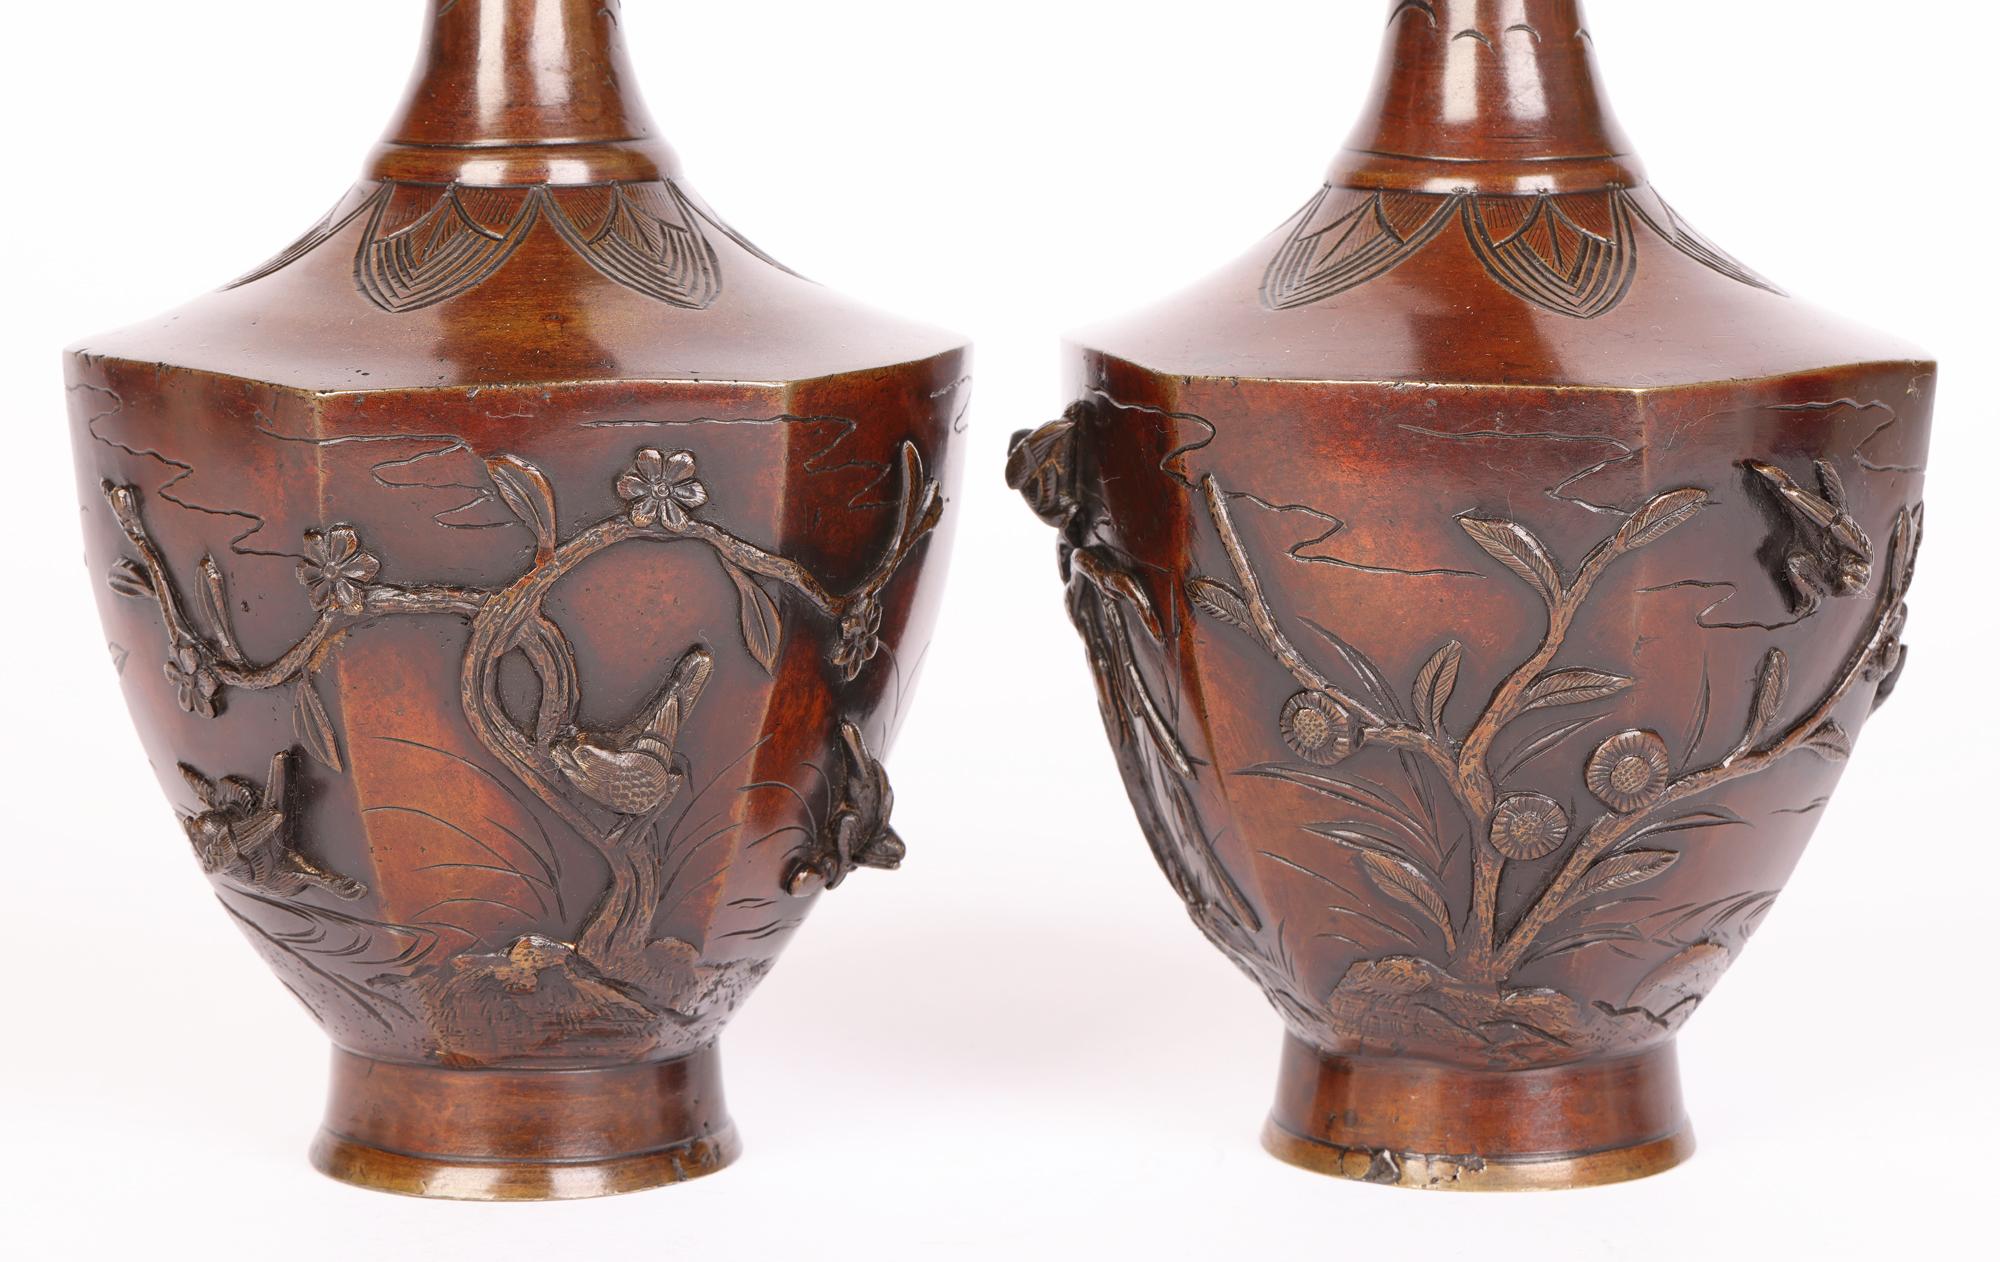 A very fine and stylish pair Oriental bronze vases, acquired as Chinese, applied with birds and dating from the latter 19th century. The vases stand on a narrow round pedestal foot with hexagonal shaped bodies and tall slender shaped necks. The